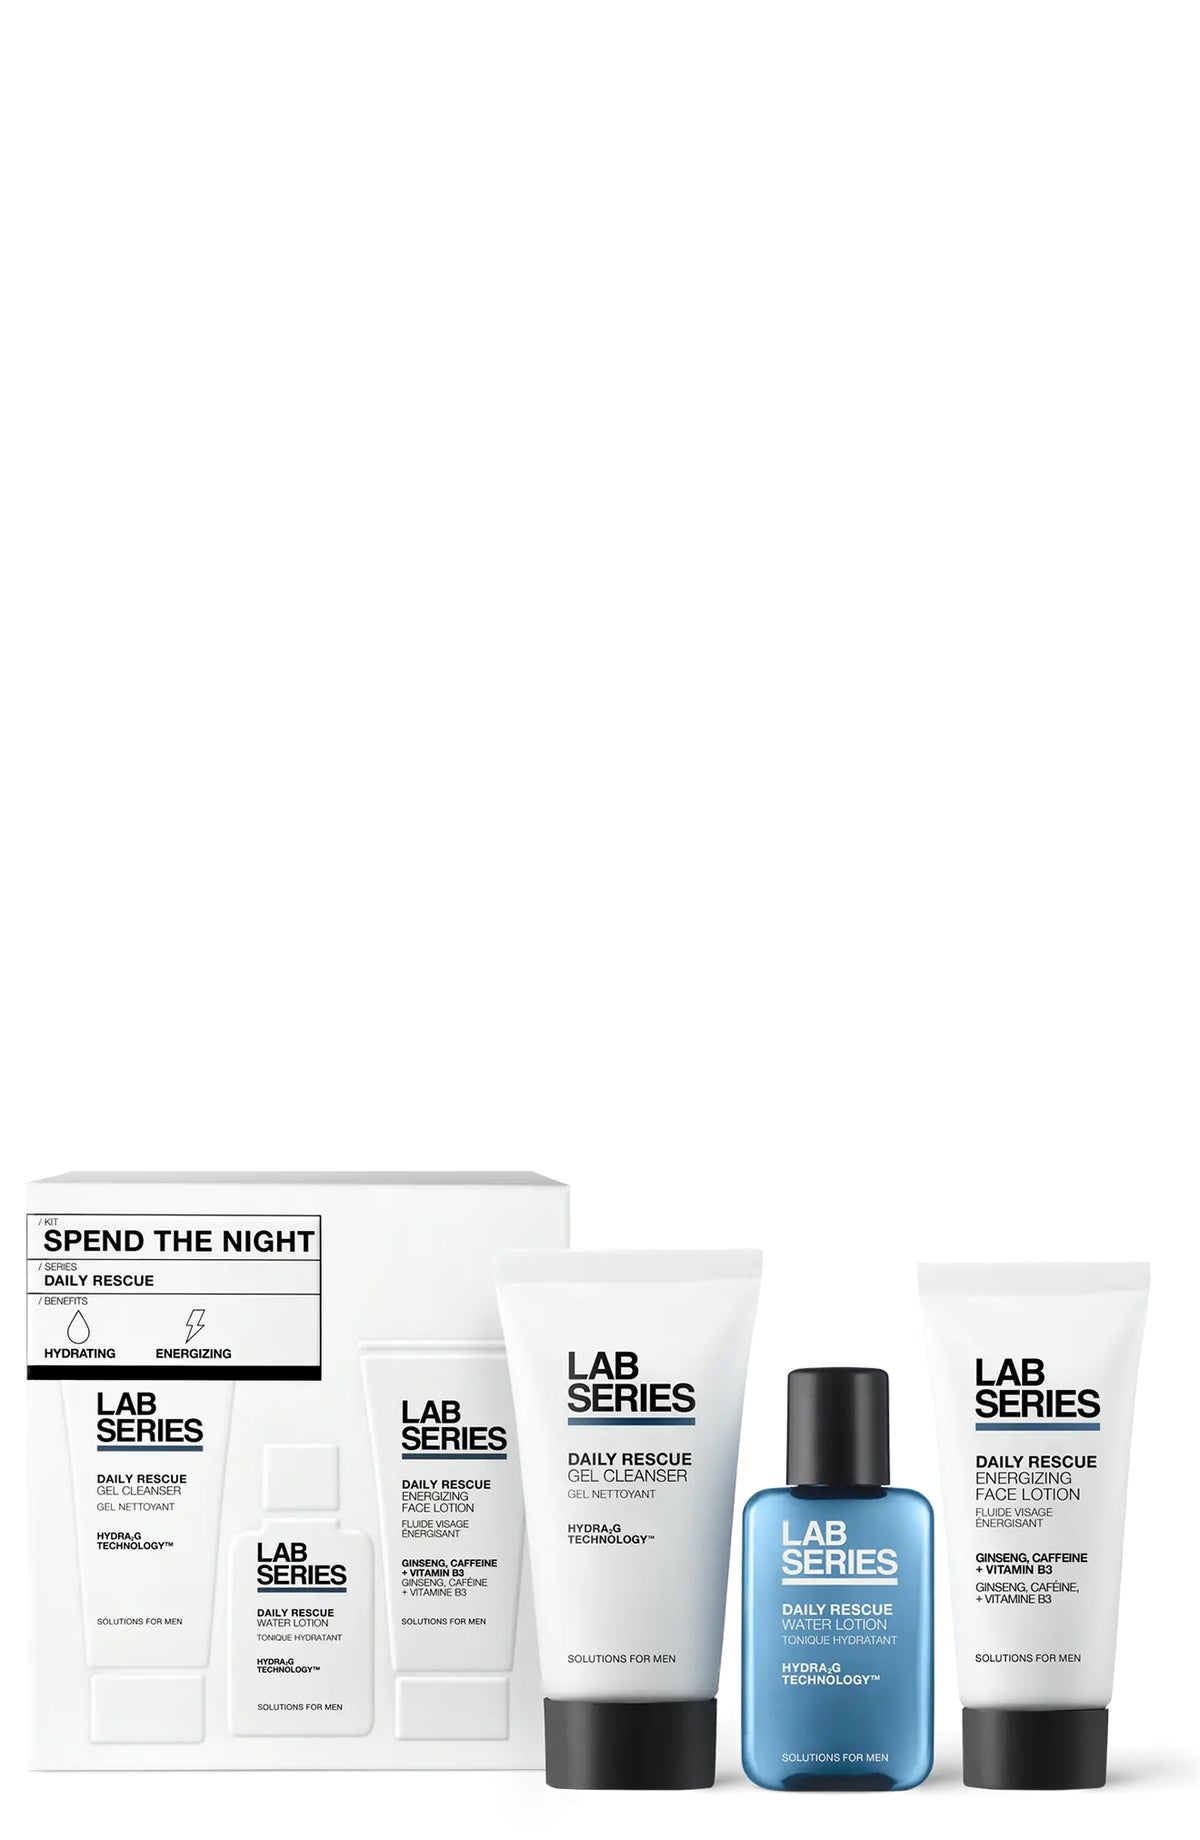 Lab Series Skincare for Men Daily Rescue Minis Spend The Night Set